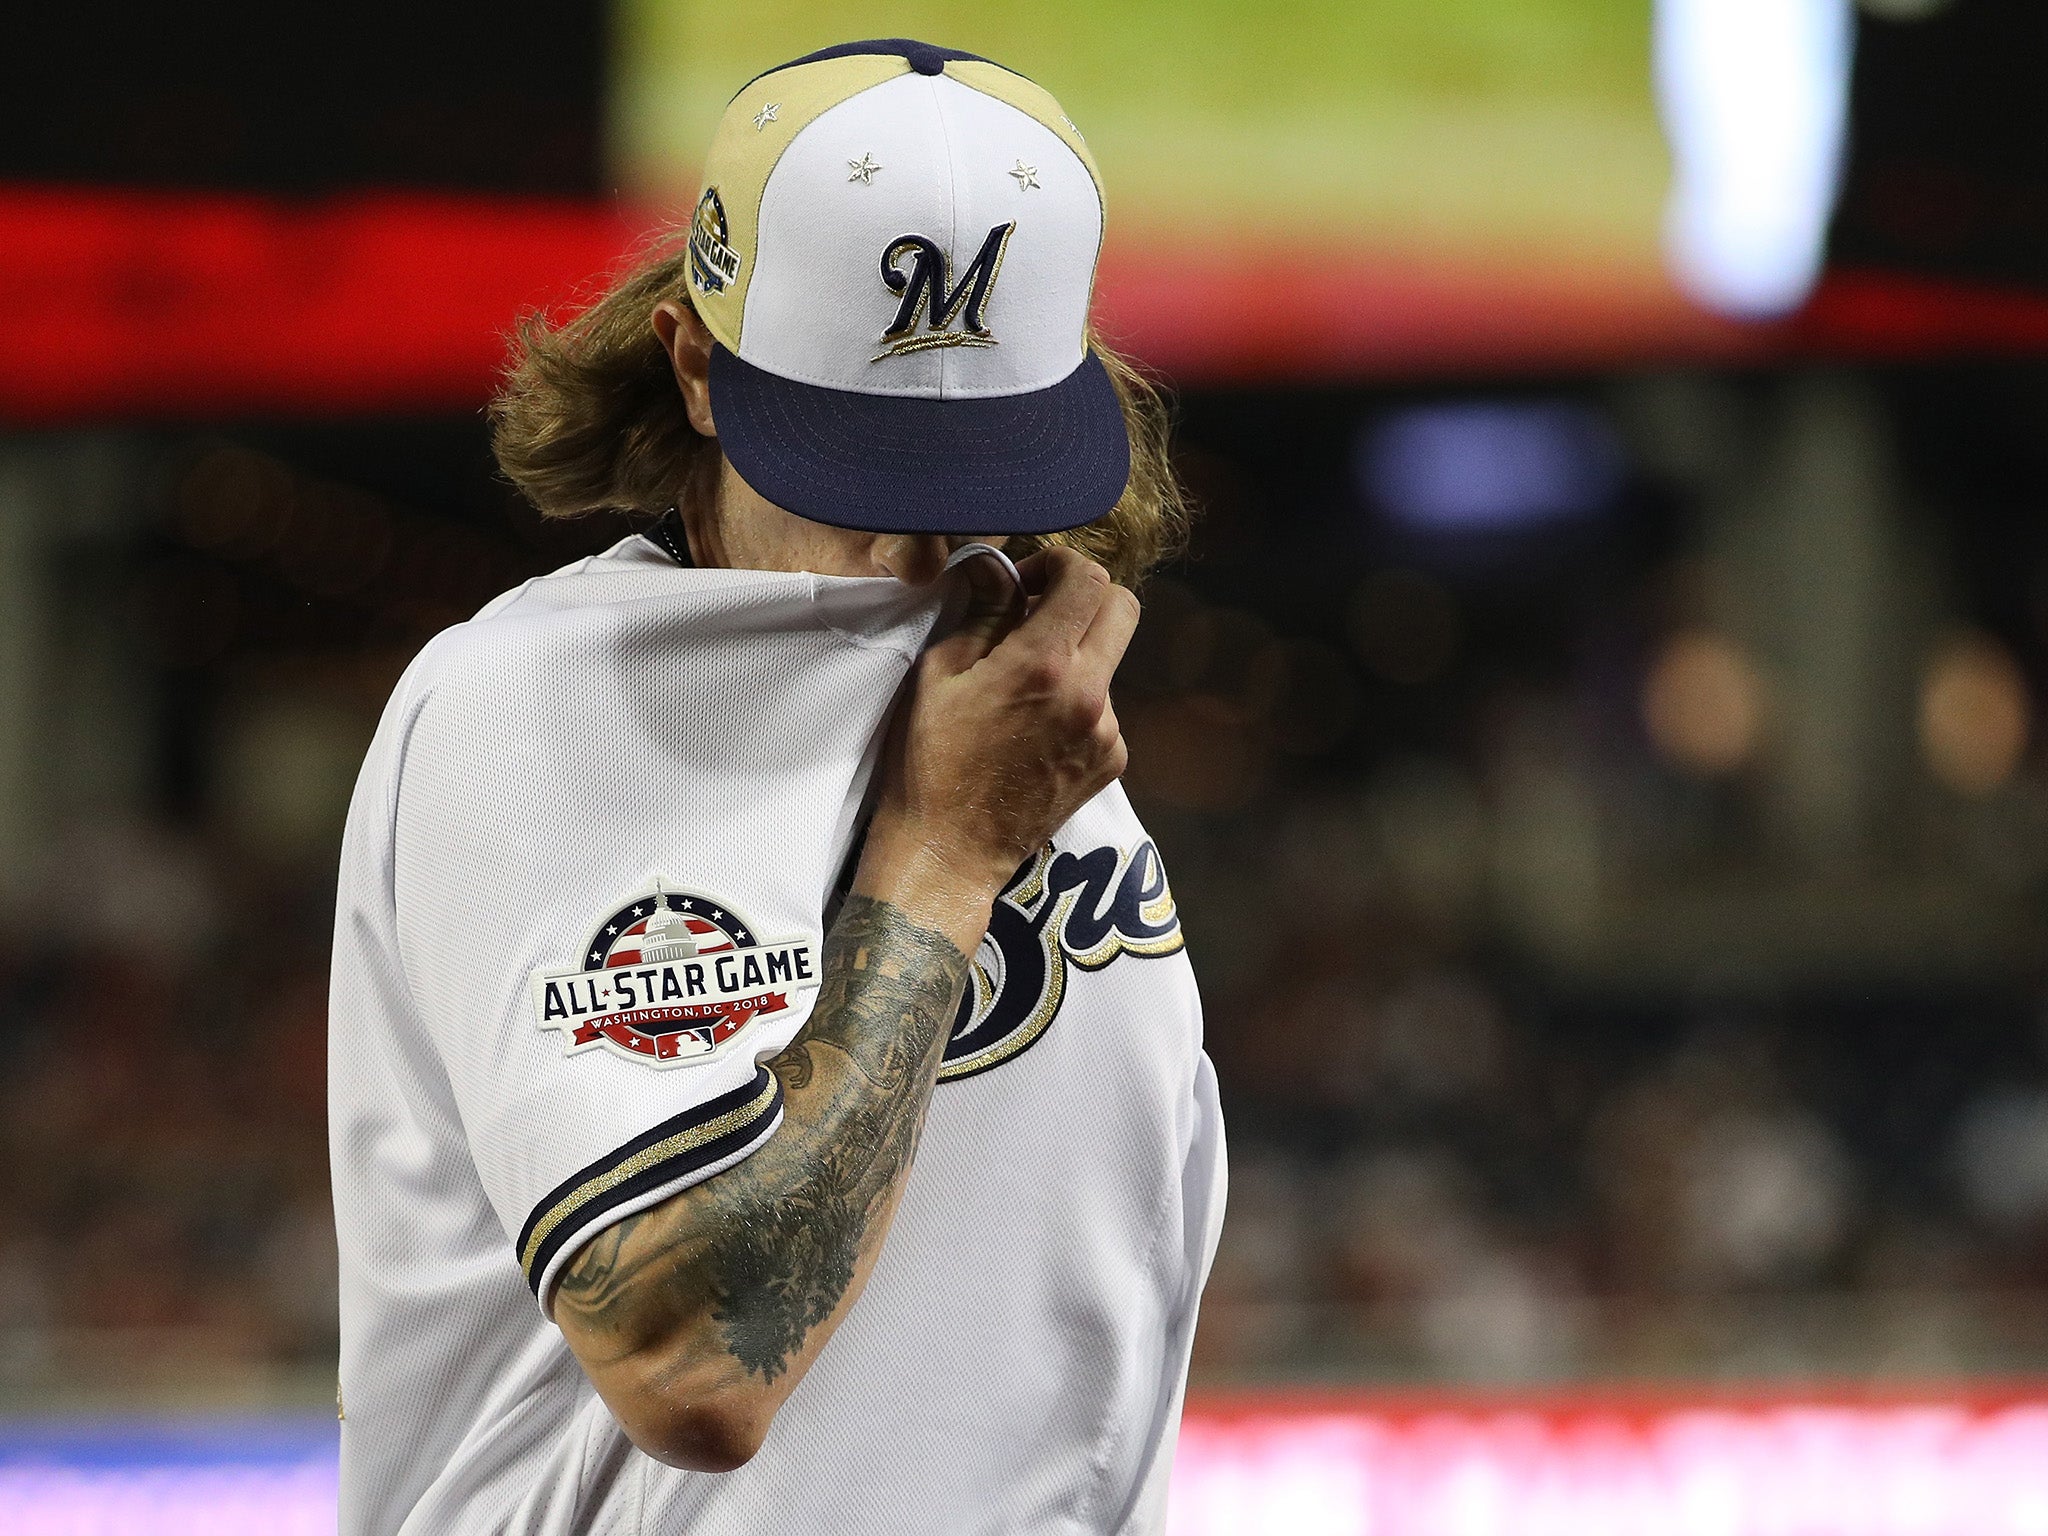 As the Josh Hader controversy showed, today's social media age has  ingrained sport with a dark toxicity, The Independent